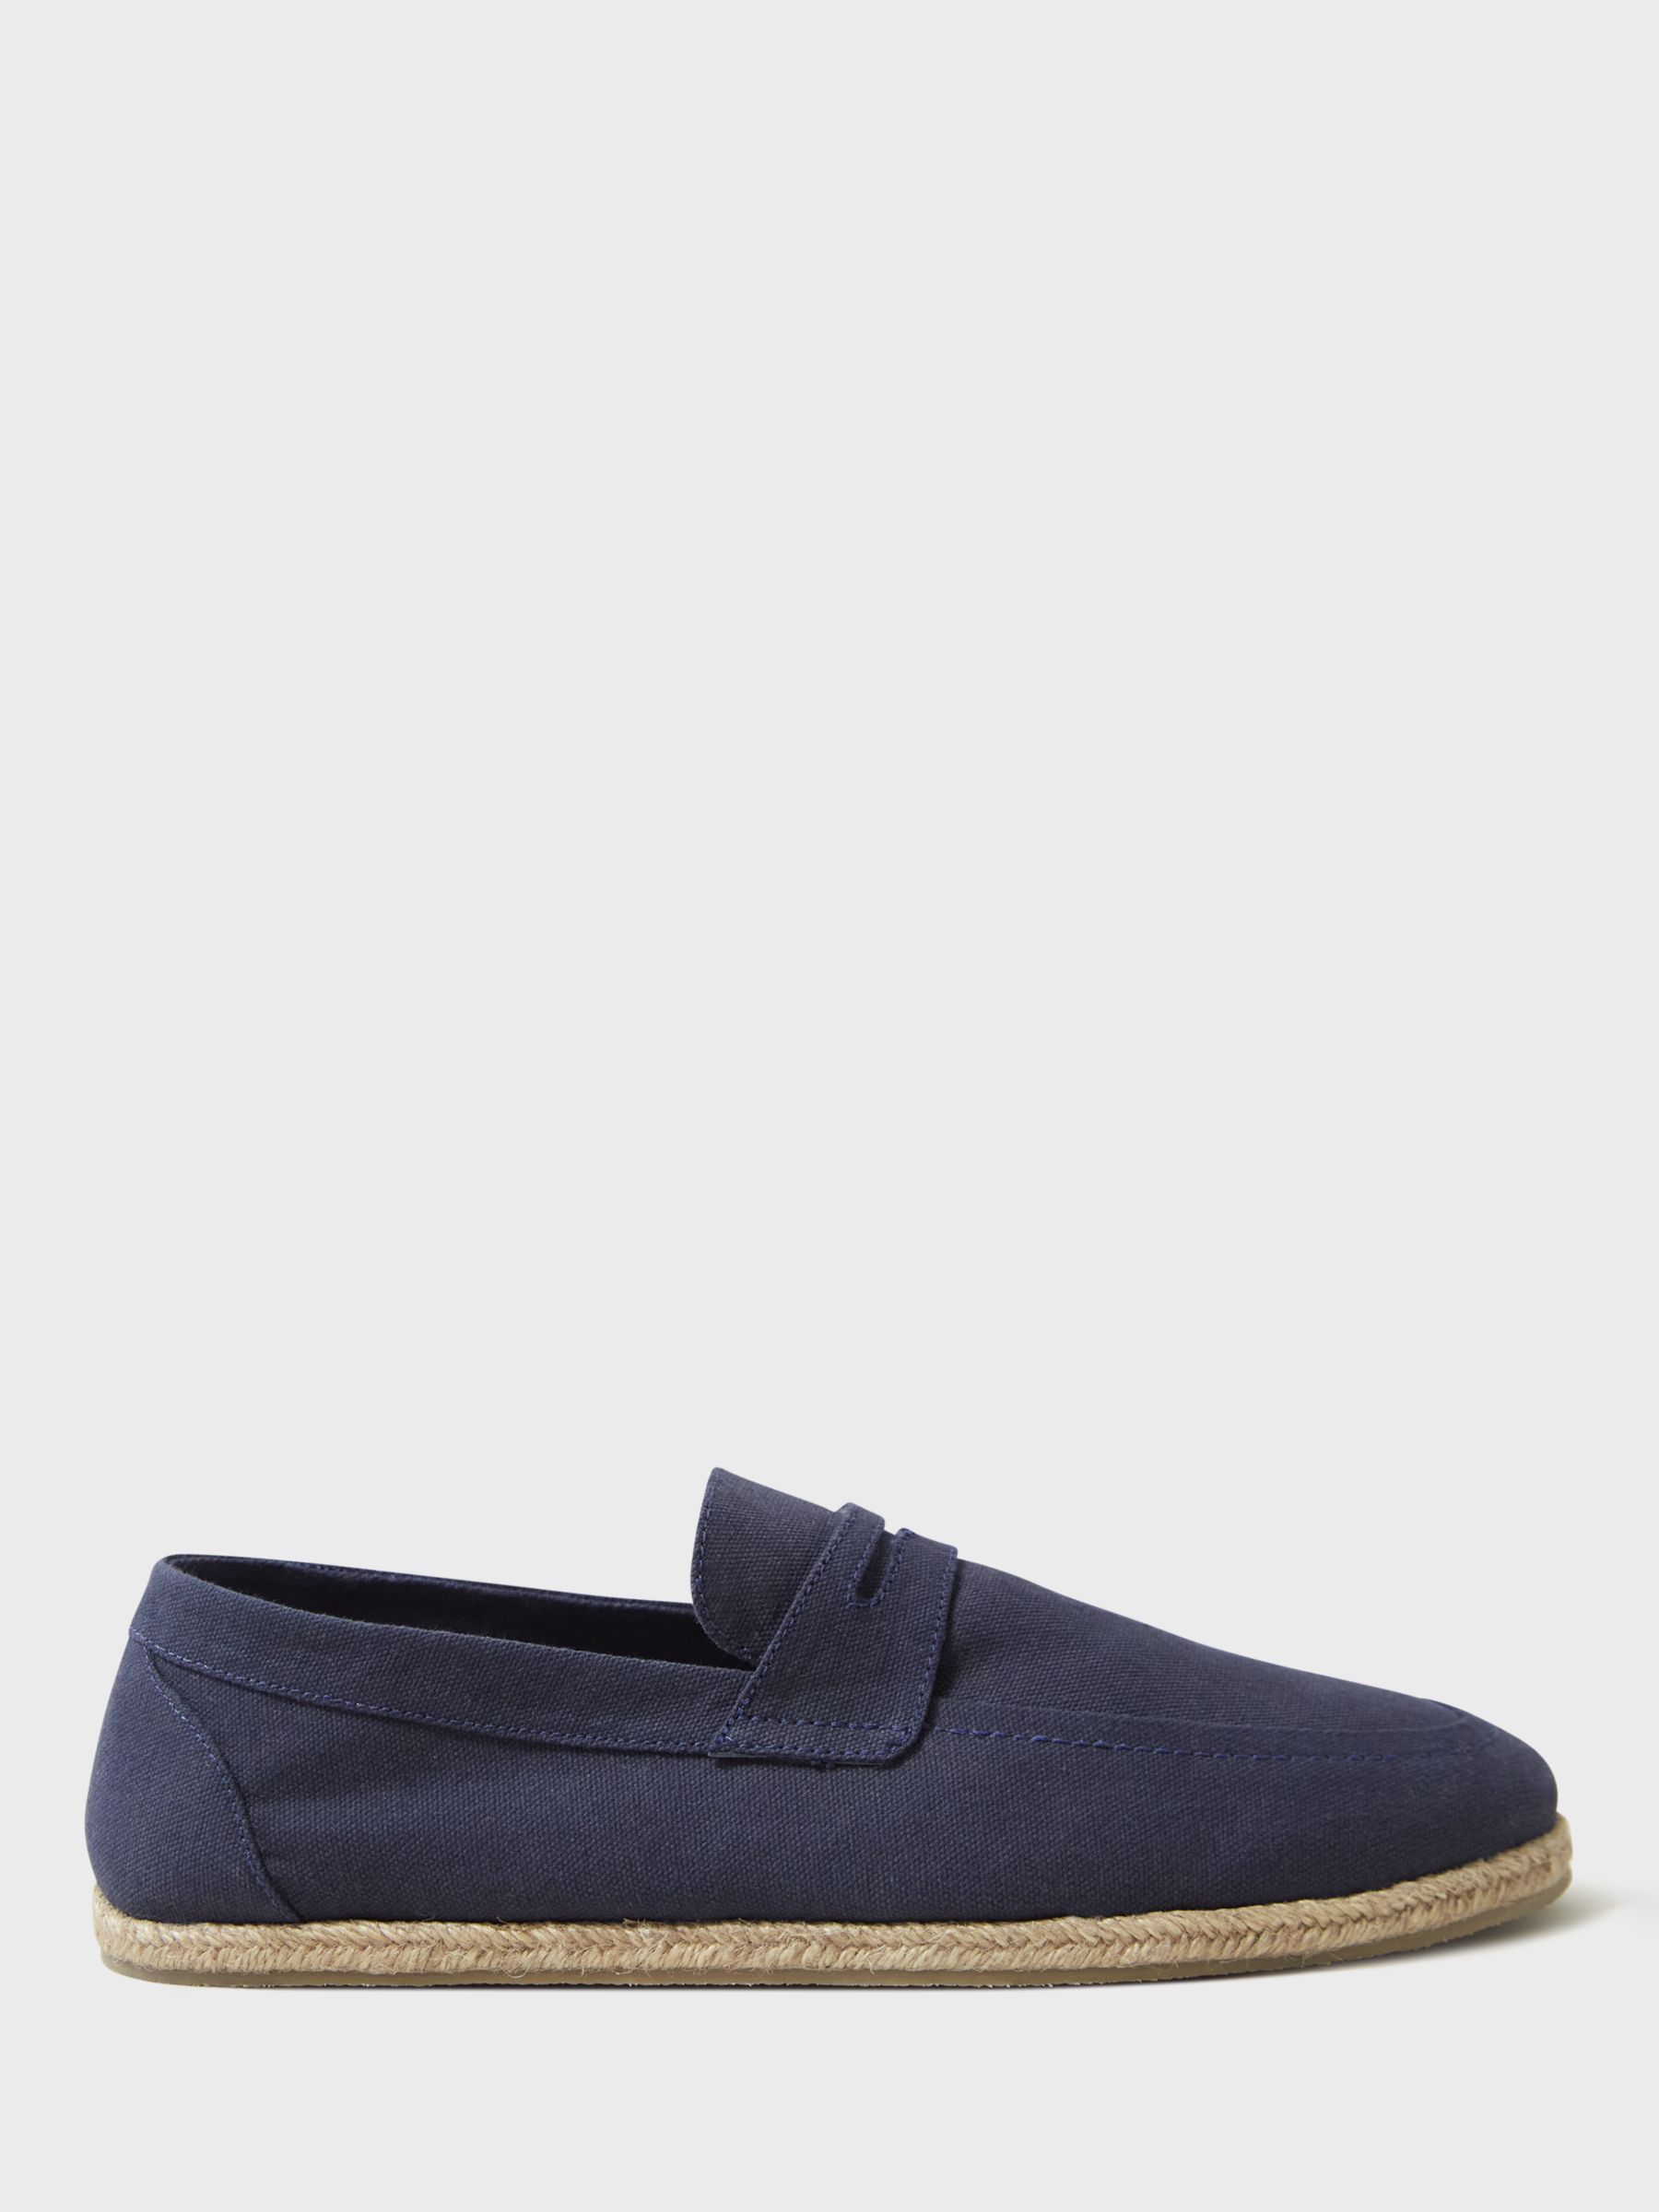 Crew Clothing Canvas Espadrille Loafers, Navy, 7